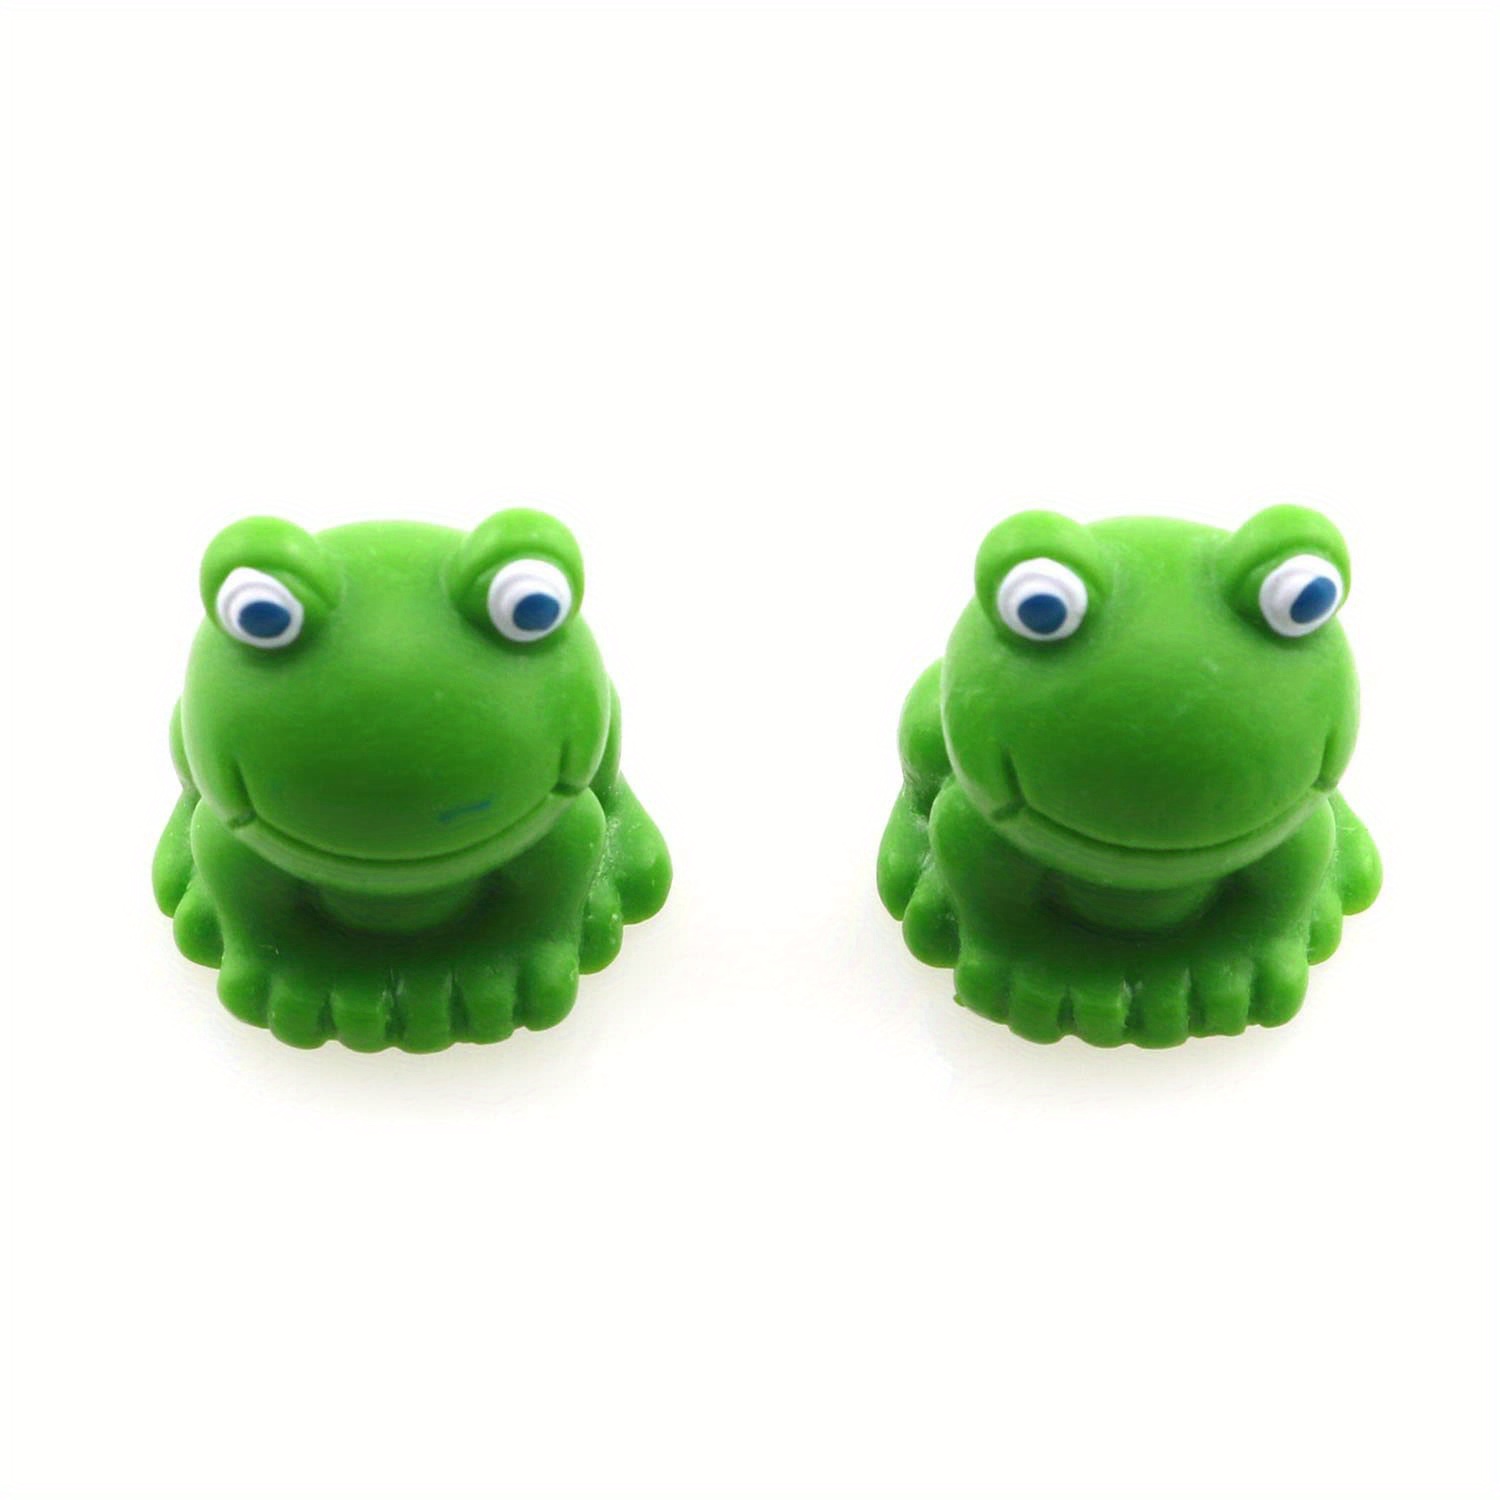 100pcs Tiny Frog Resin Mini Frogs Figurines,Garden Decor Green Frog  Figurines Miniature Home Décor Plastic Frogs Fairy DIY Craft - AliExpress